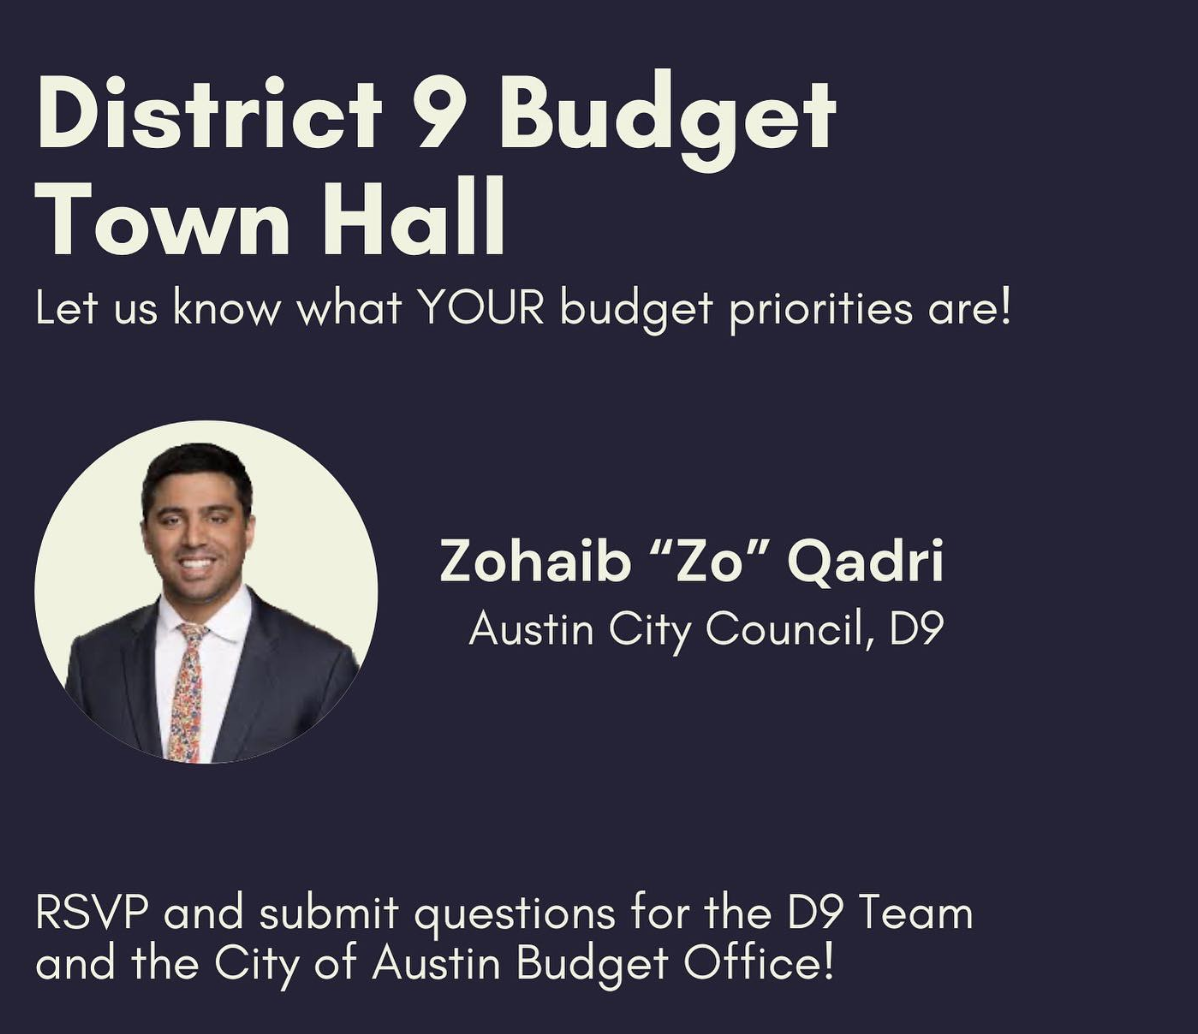 District 9 Budget Town Hall